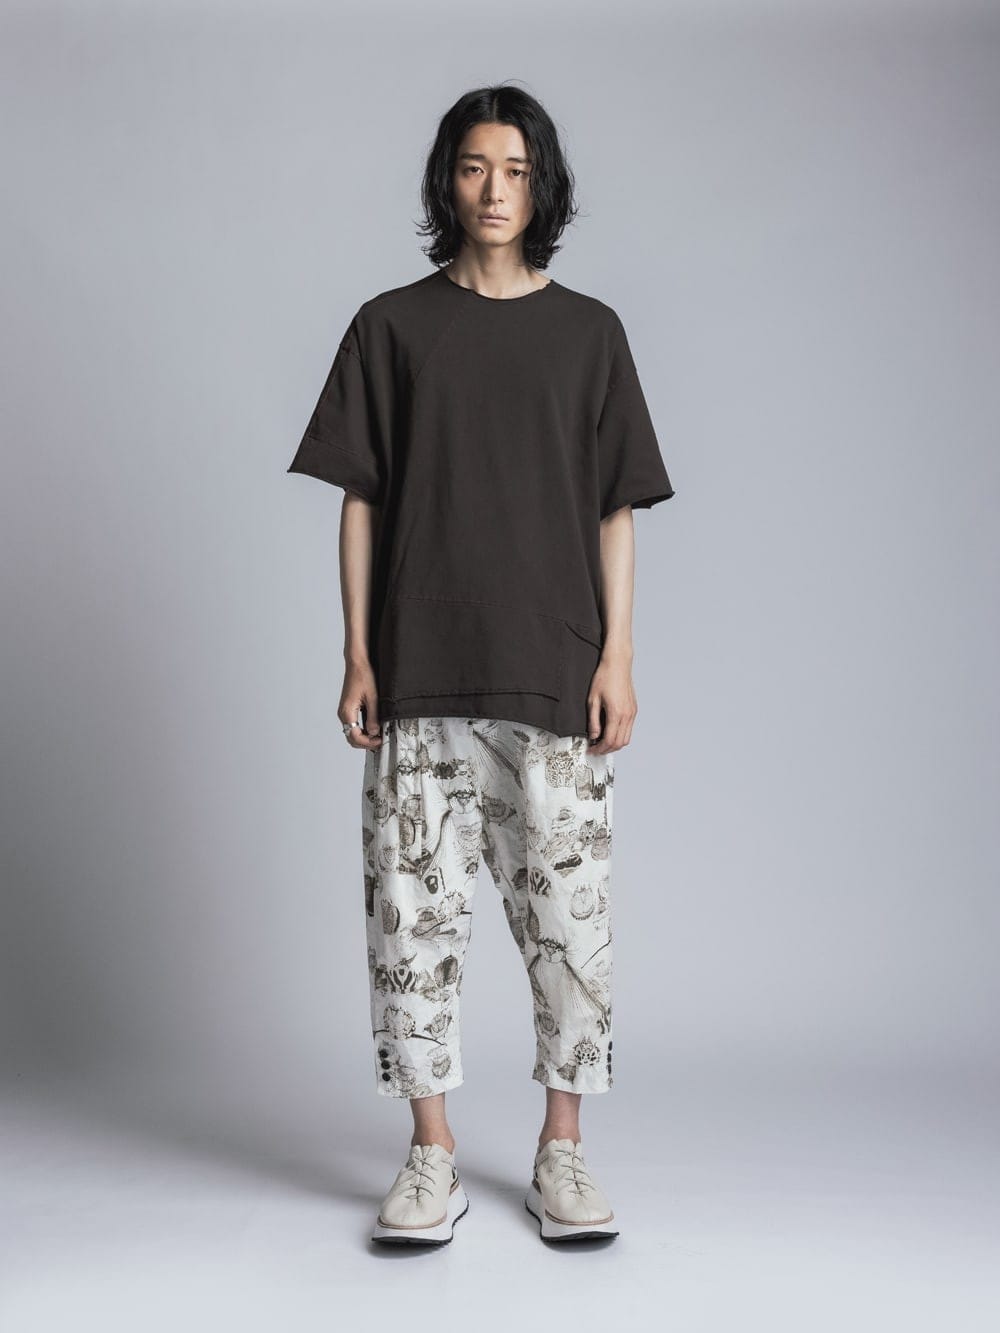 LOGY Kyoto 2022 SS Recommended T-Shirt!! - FASCINATE BLOG